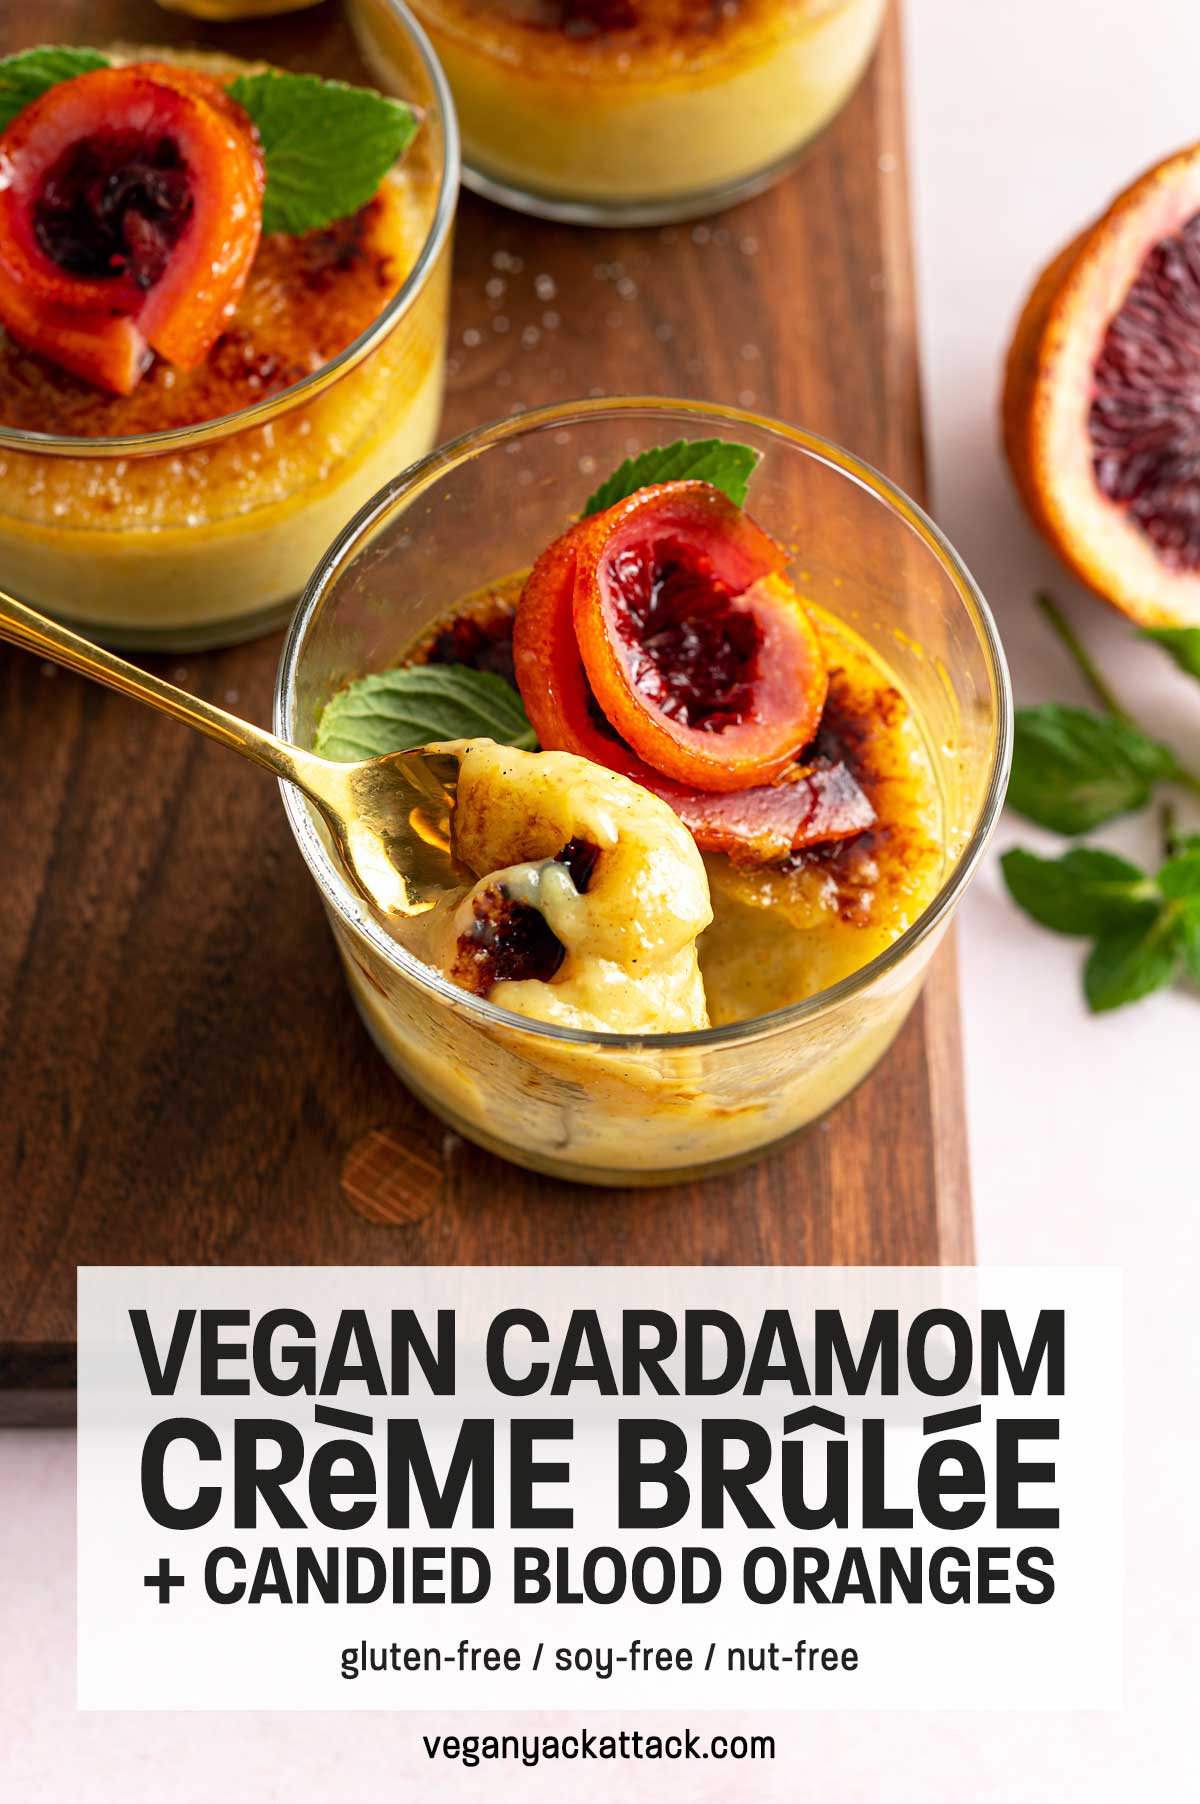 Image of spoon scooping out vegan creme brûlée on a wood board with text overlay 